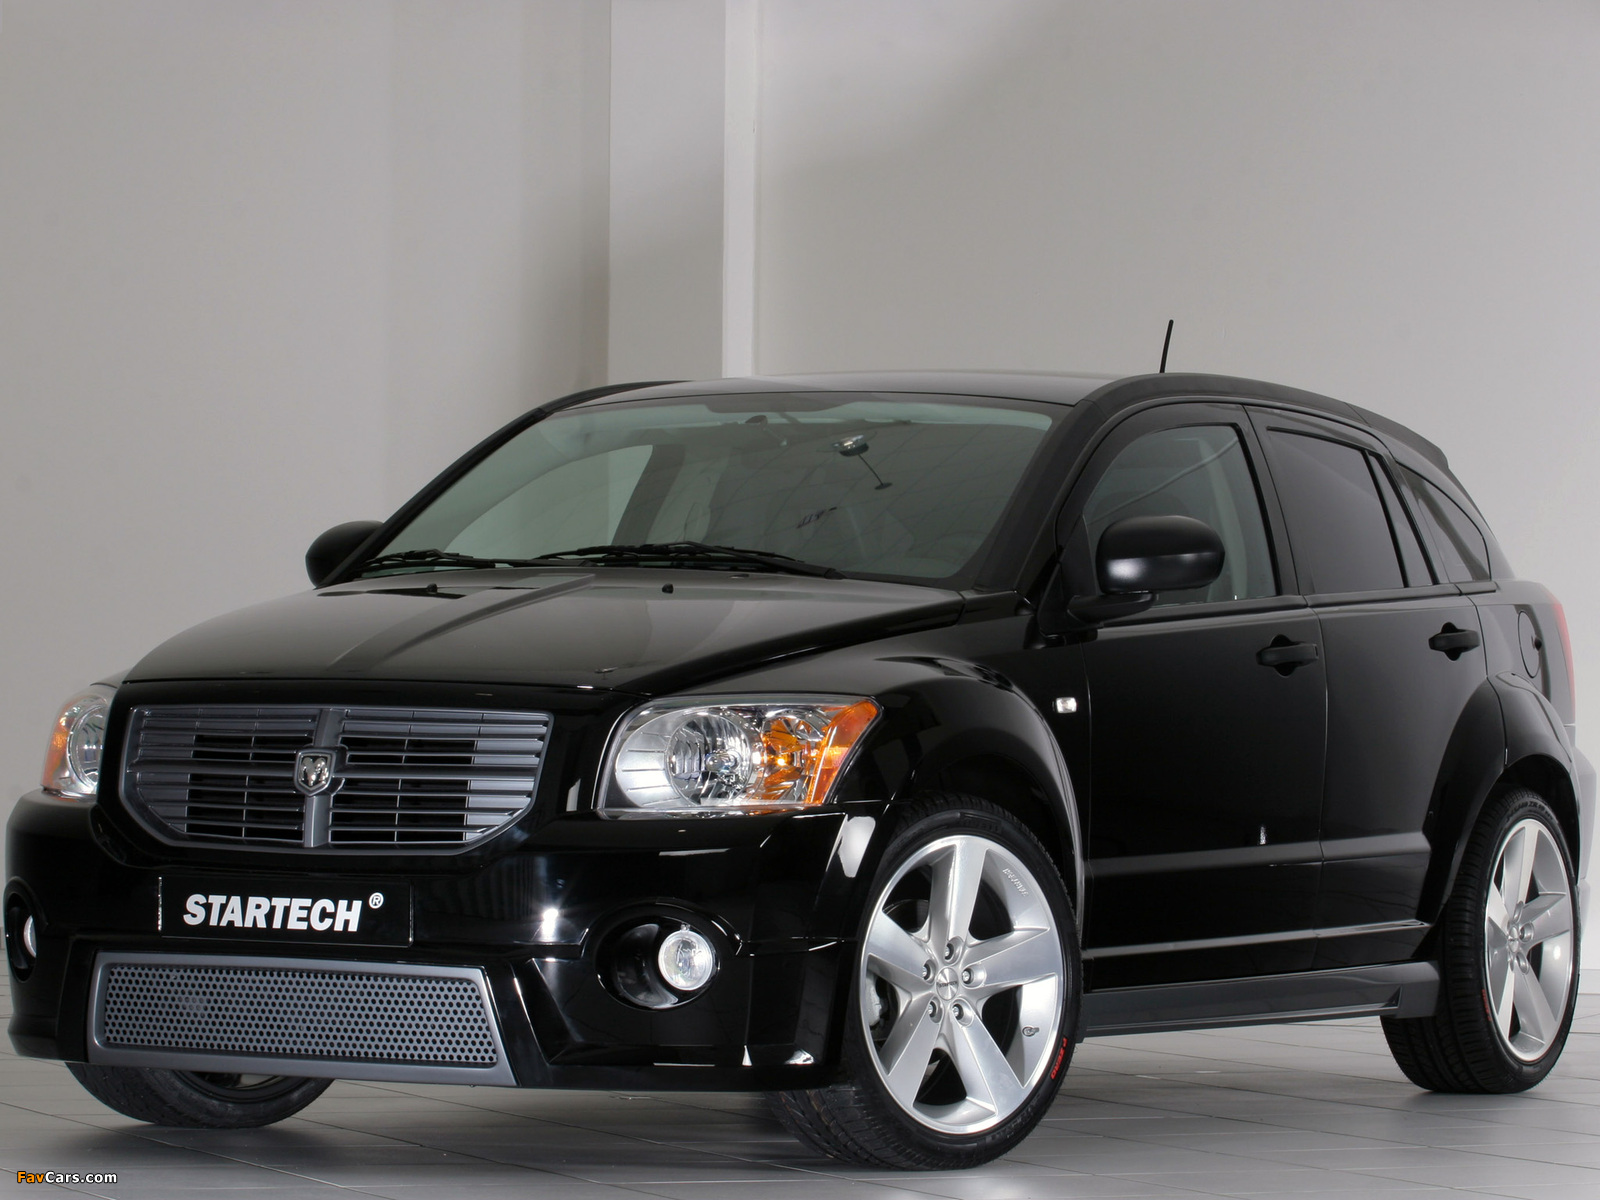 Startech Dodge Caliber 2006 pictures (1600 x 1200)